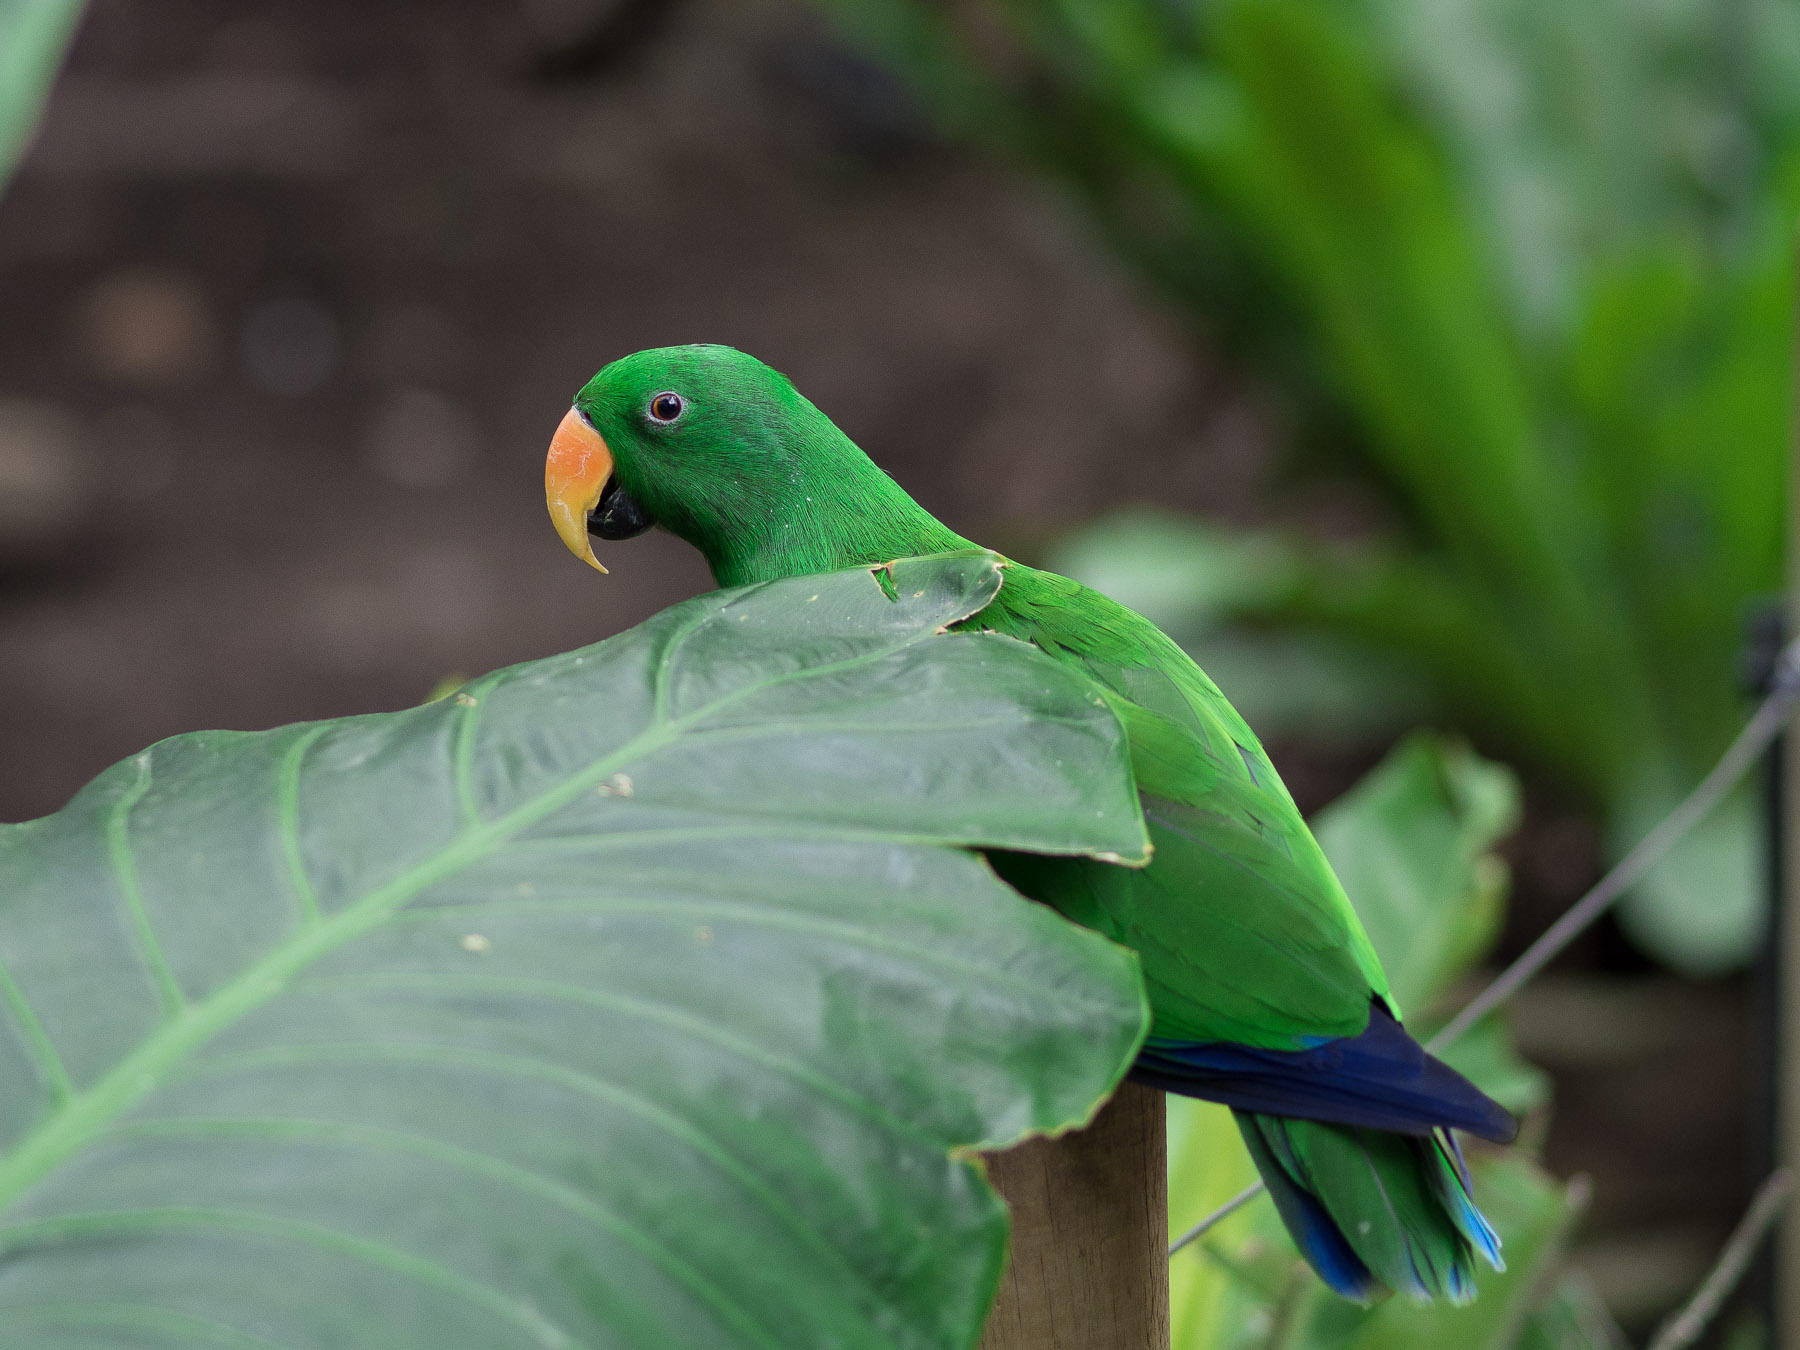 A vivid green parrot partially occluded by a large leaf. The background is out of focus, but contains more plants.